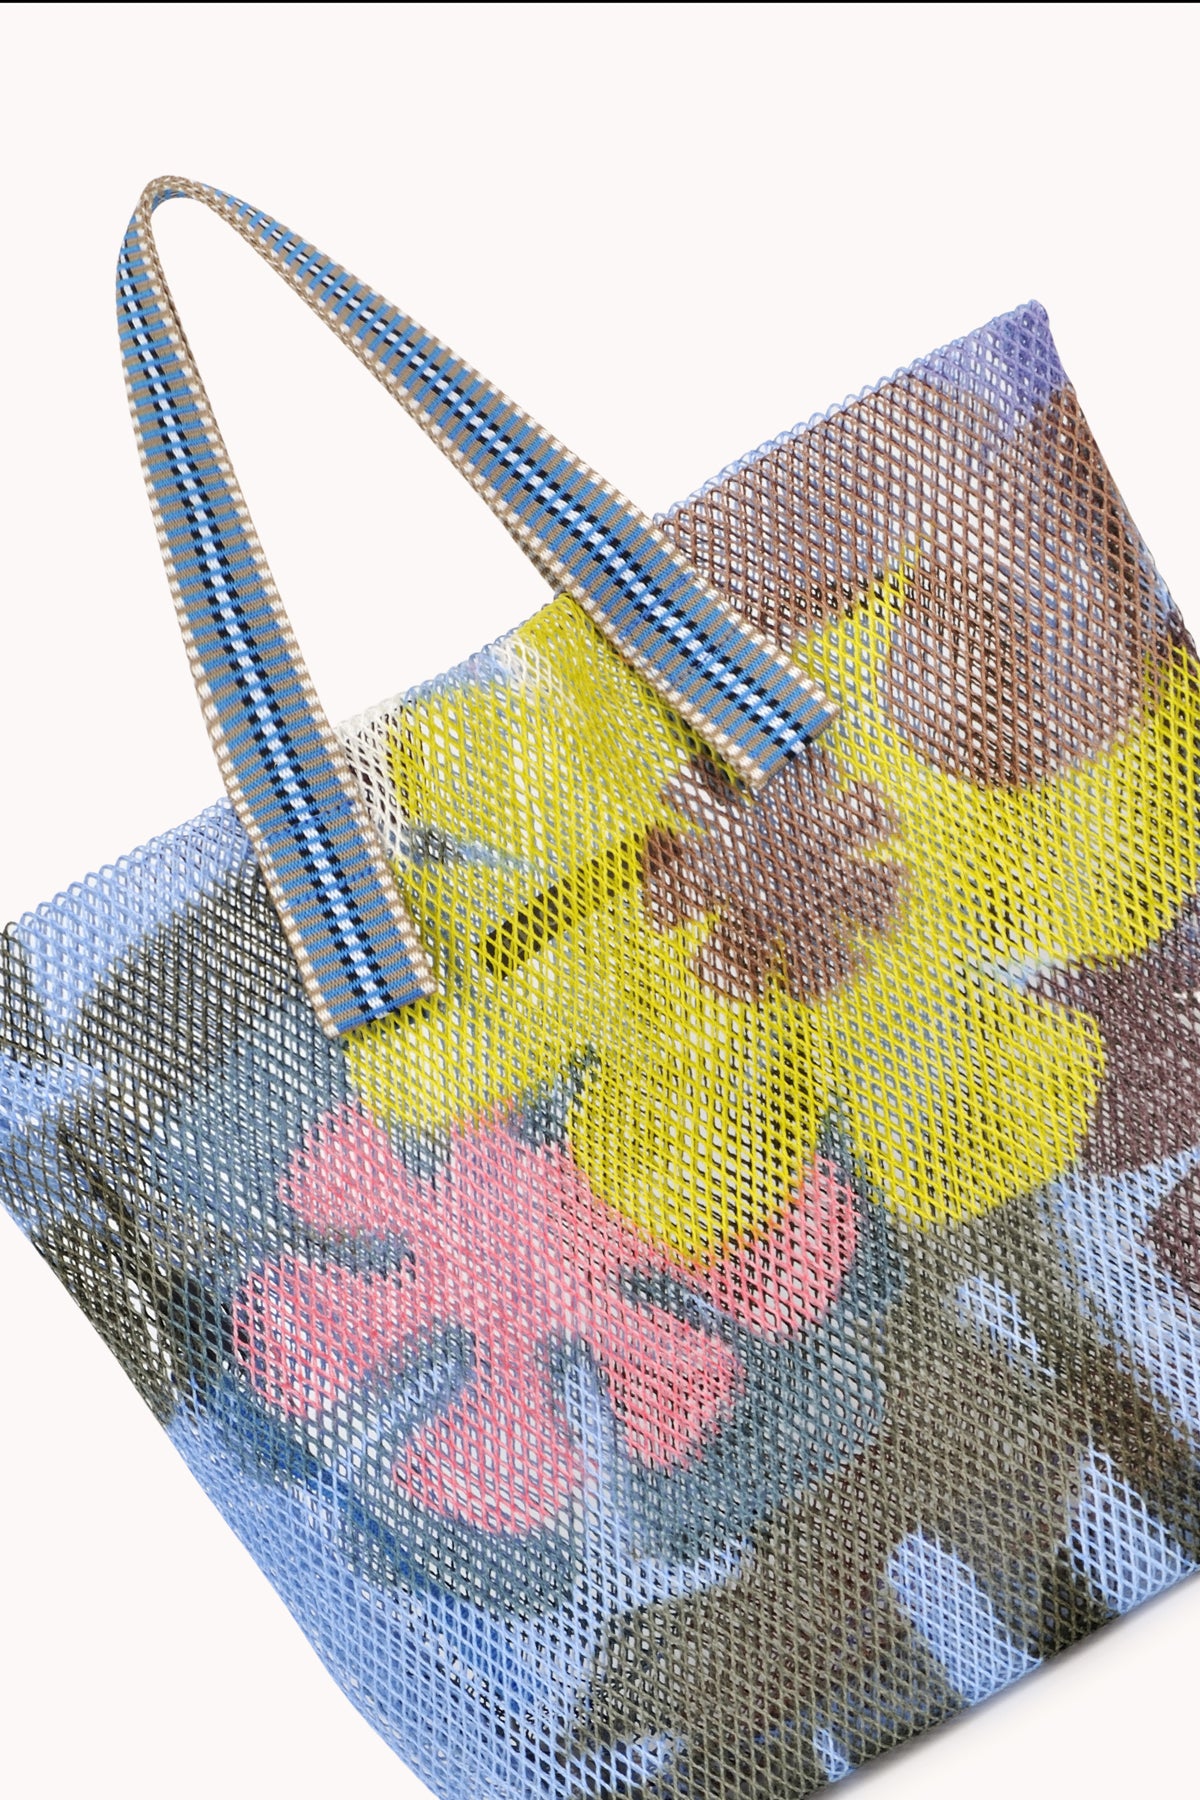 Small mesh tote in blue with multi colored flowers and striped strap.-24508064202945